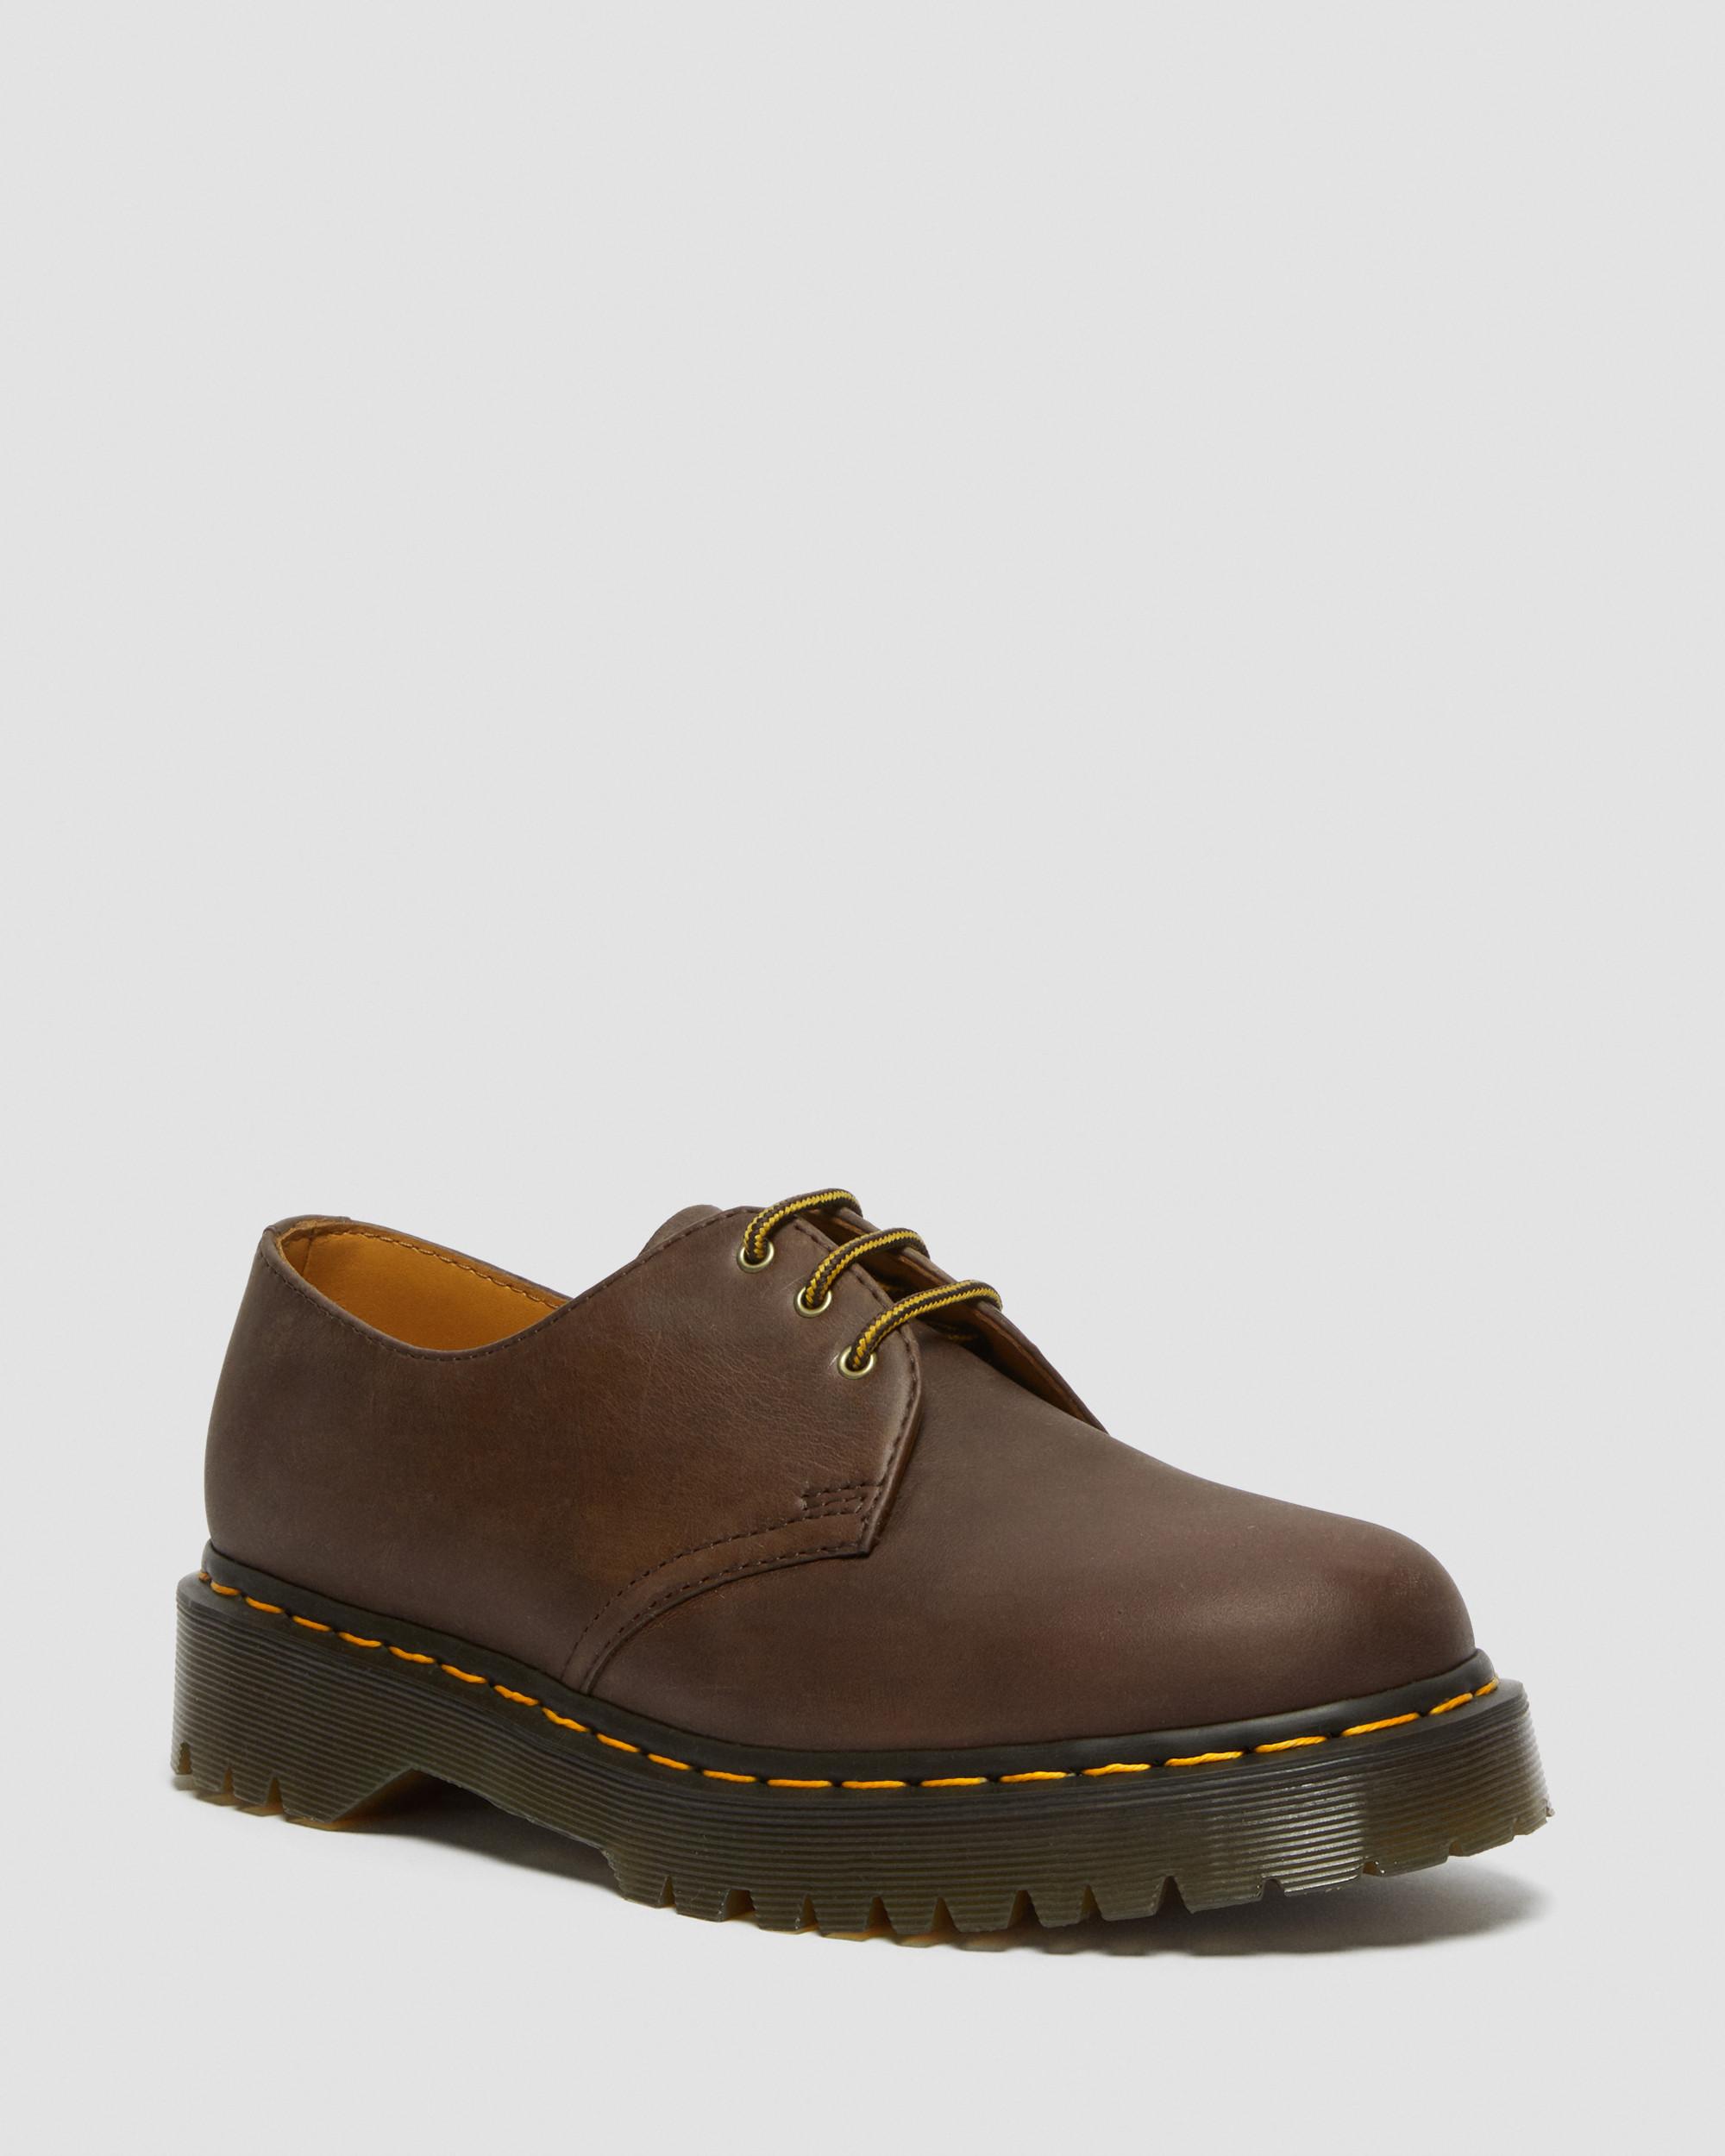 1461 Bex Crazy Horse Leather Oxford Shoes in Dark Brown | Dr. Martens